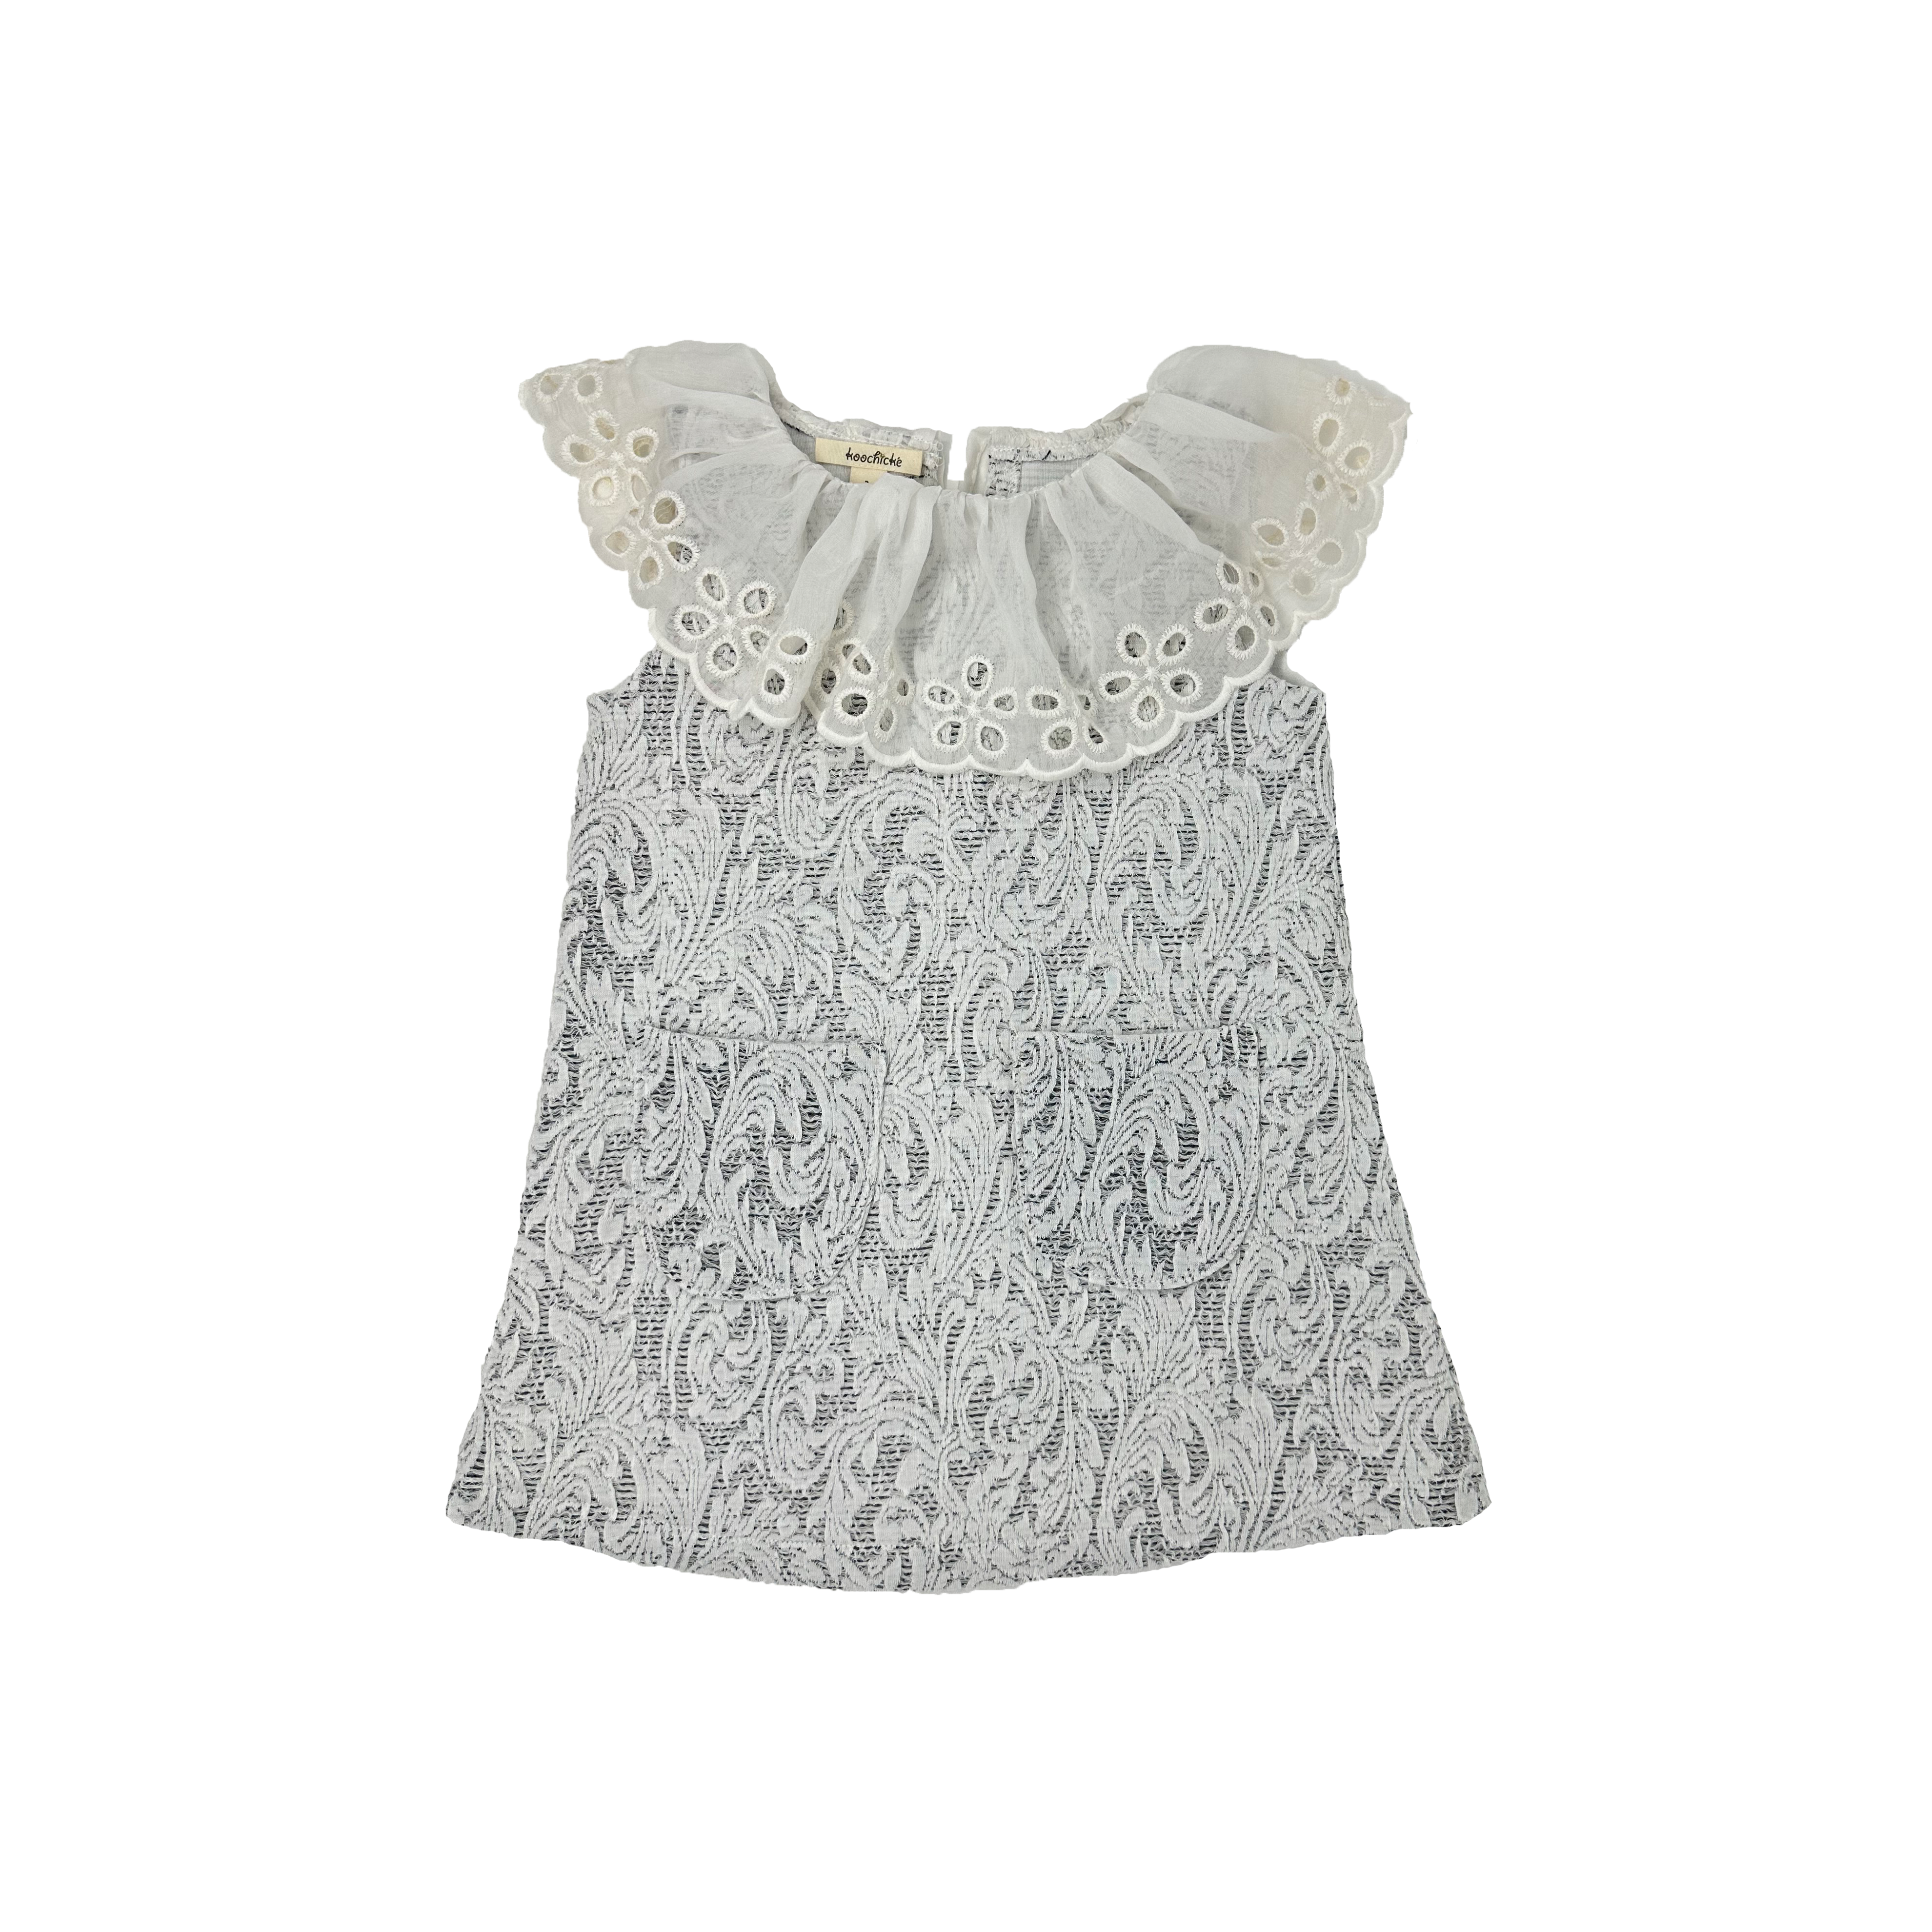 Girls A-LIne white and gray lace Dress